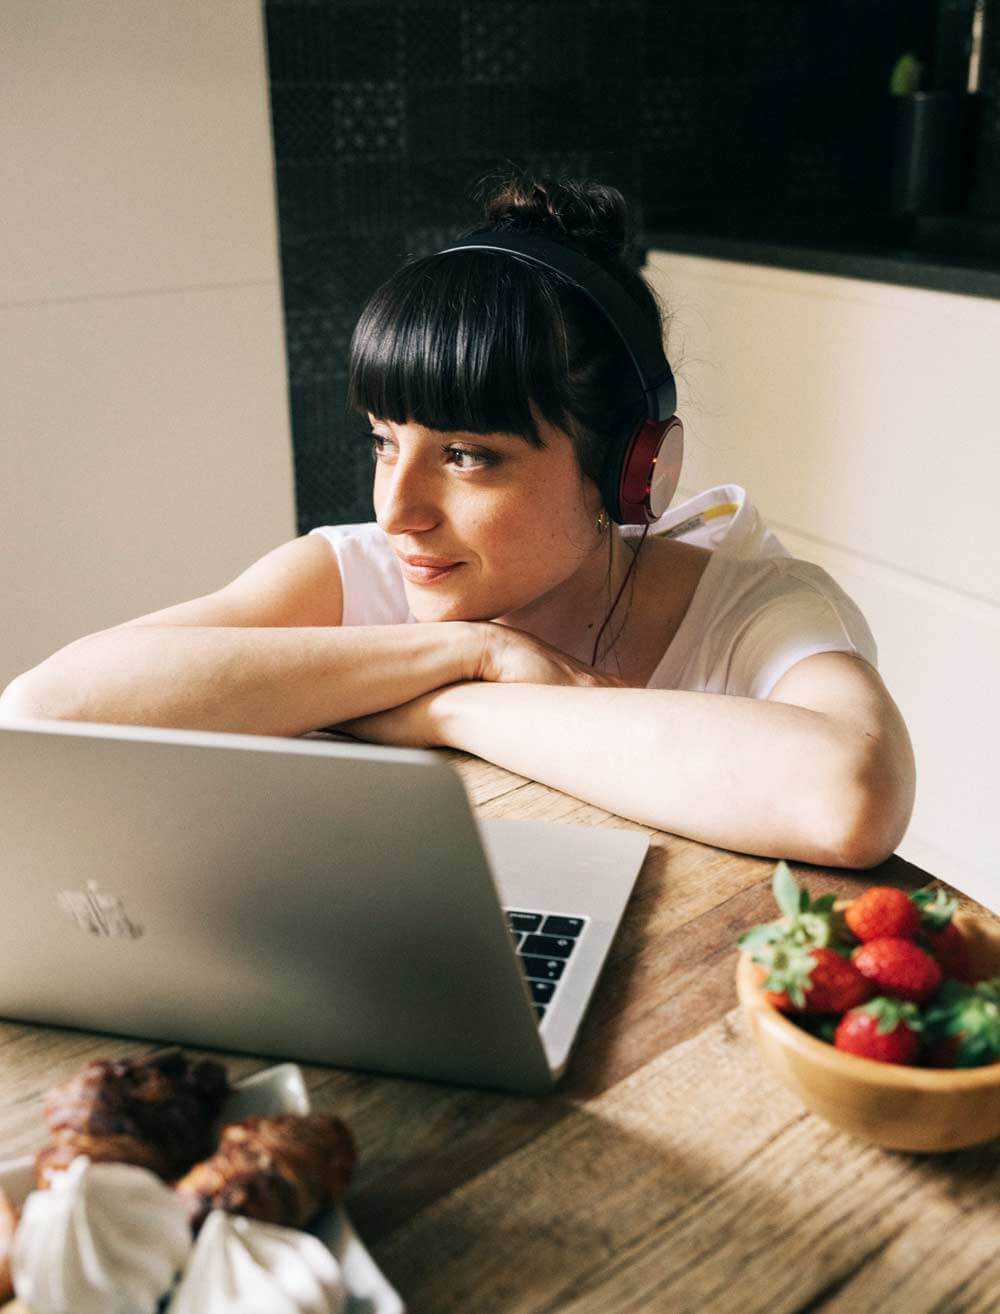 Woman at home relaxing with her laptop